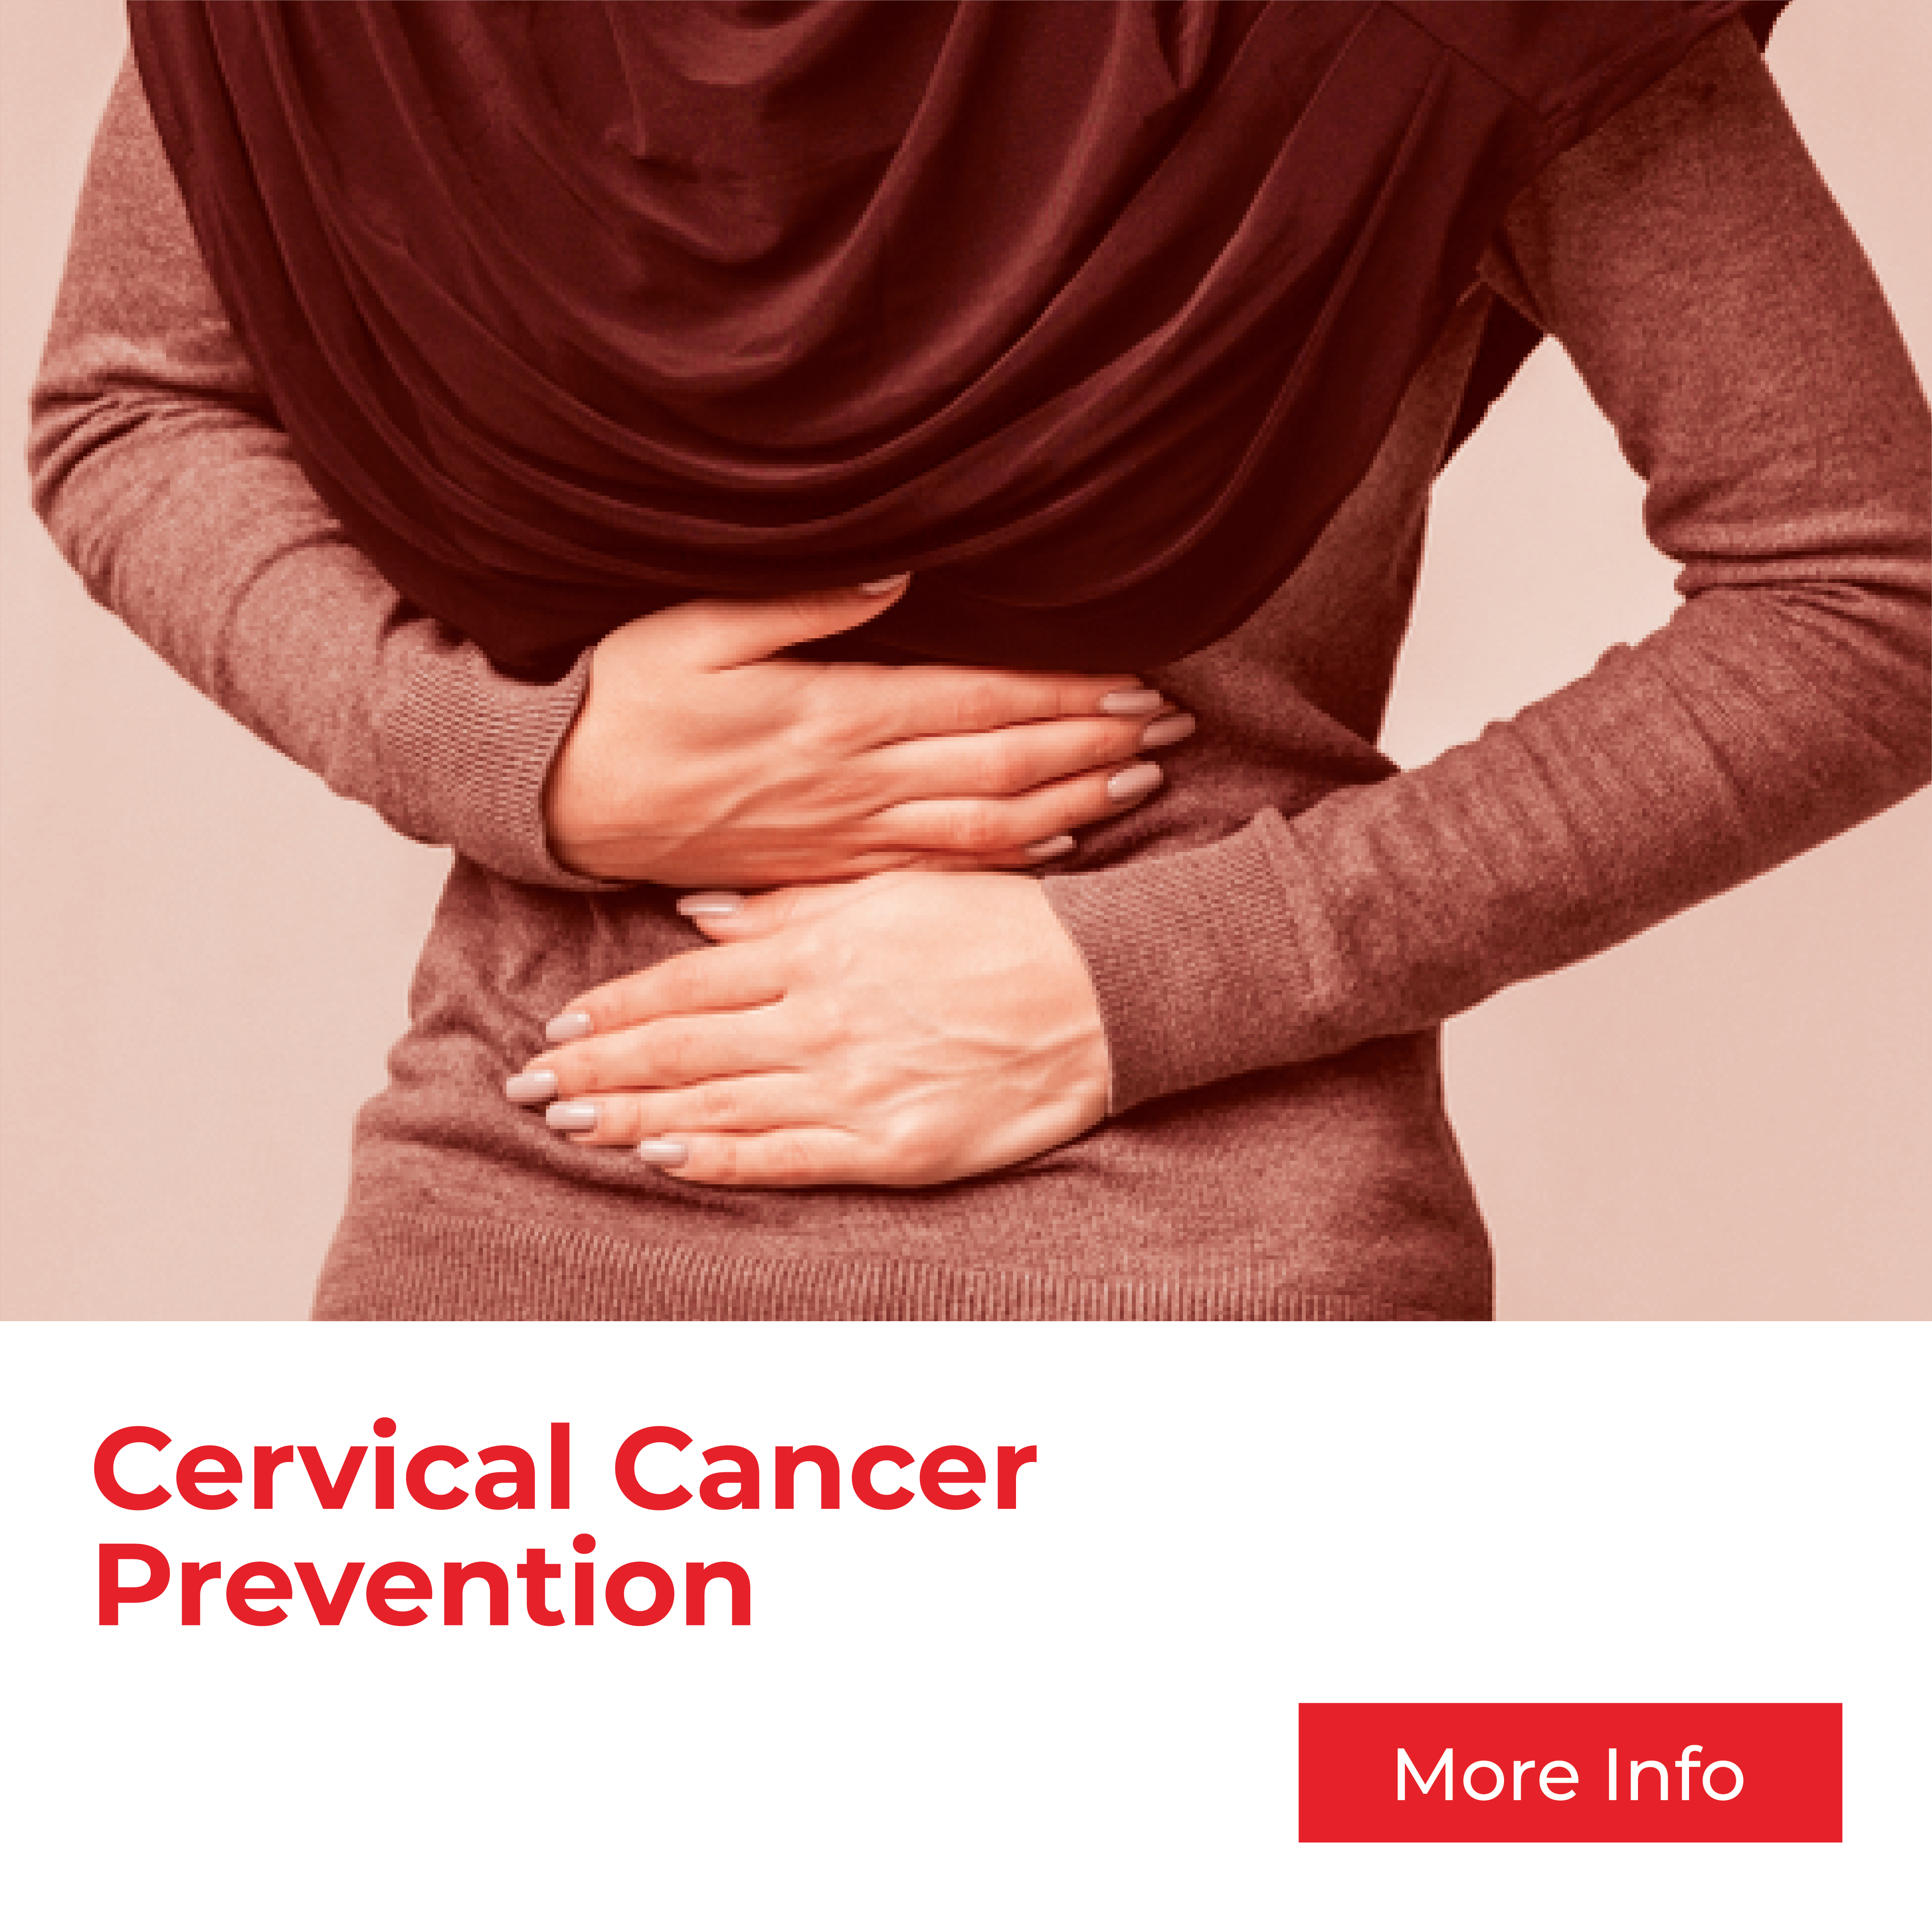 Cervical Cancer Screening & Prevention by Klinik As Salam